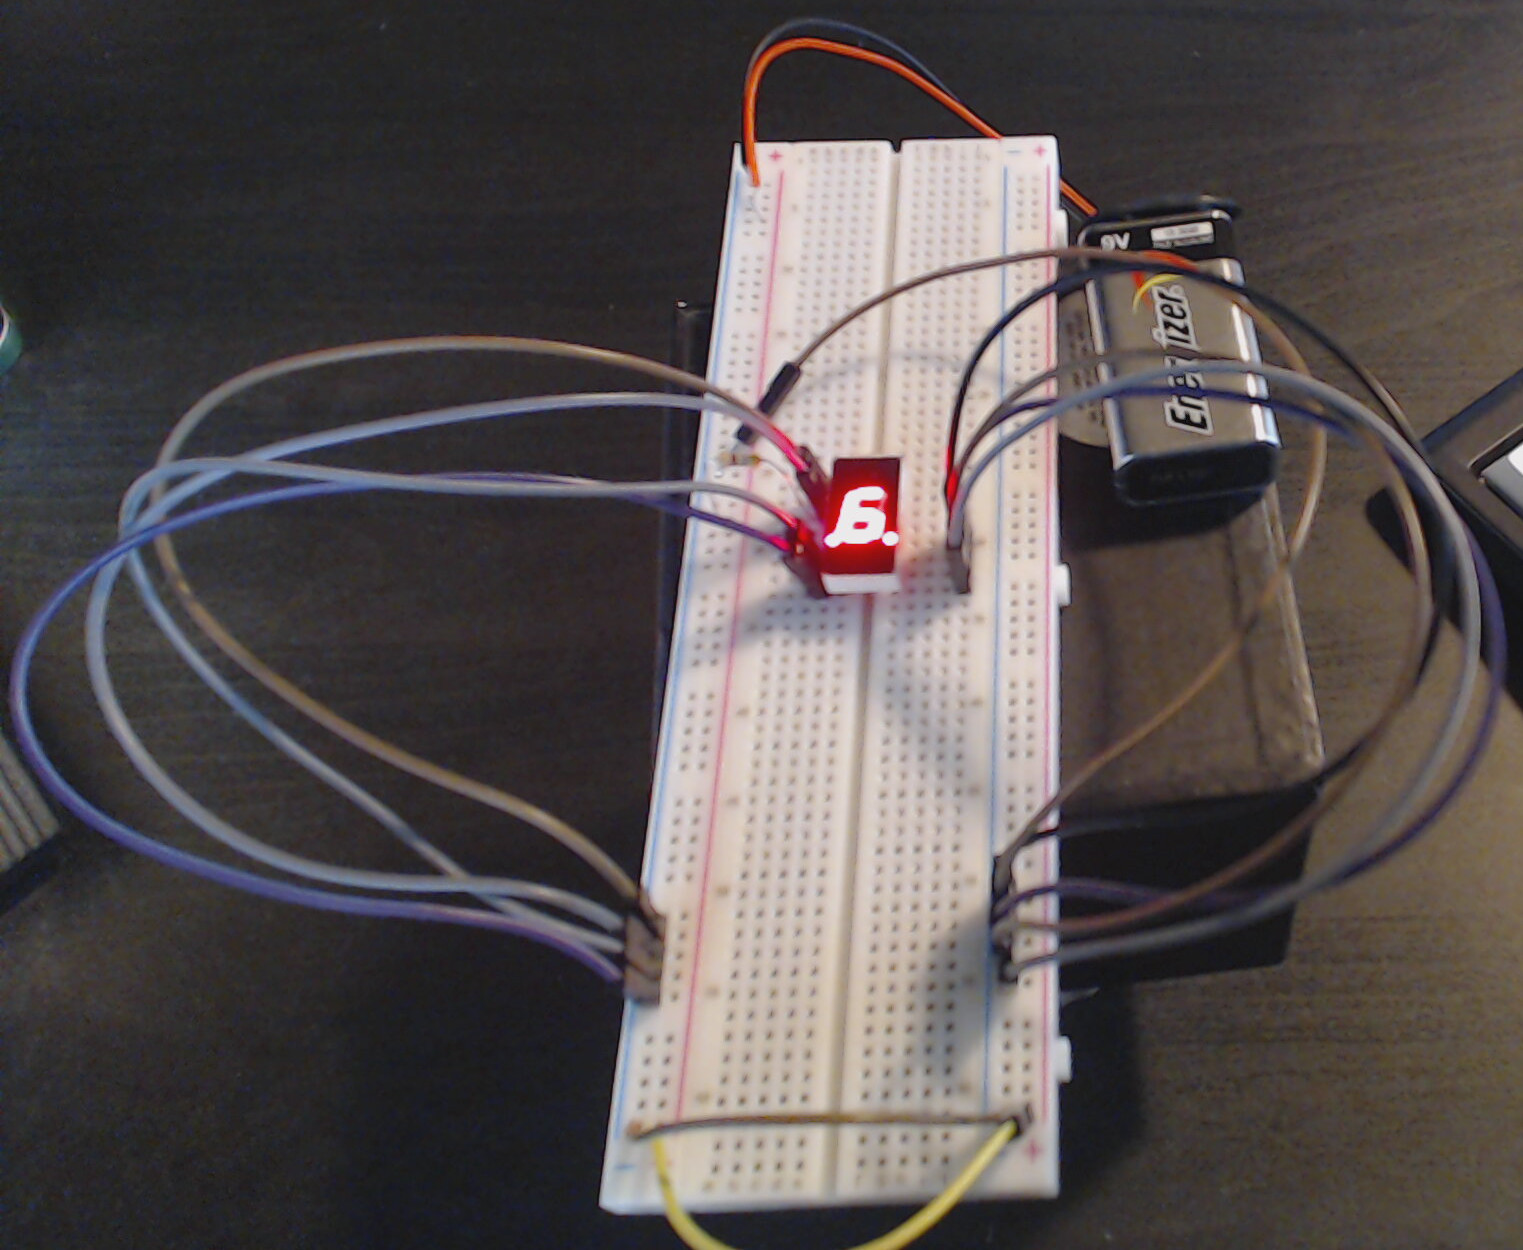 A basic seven-segment display with one segment not powered.